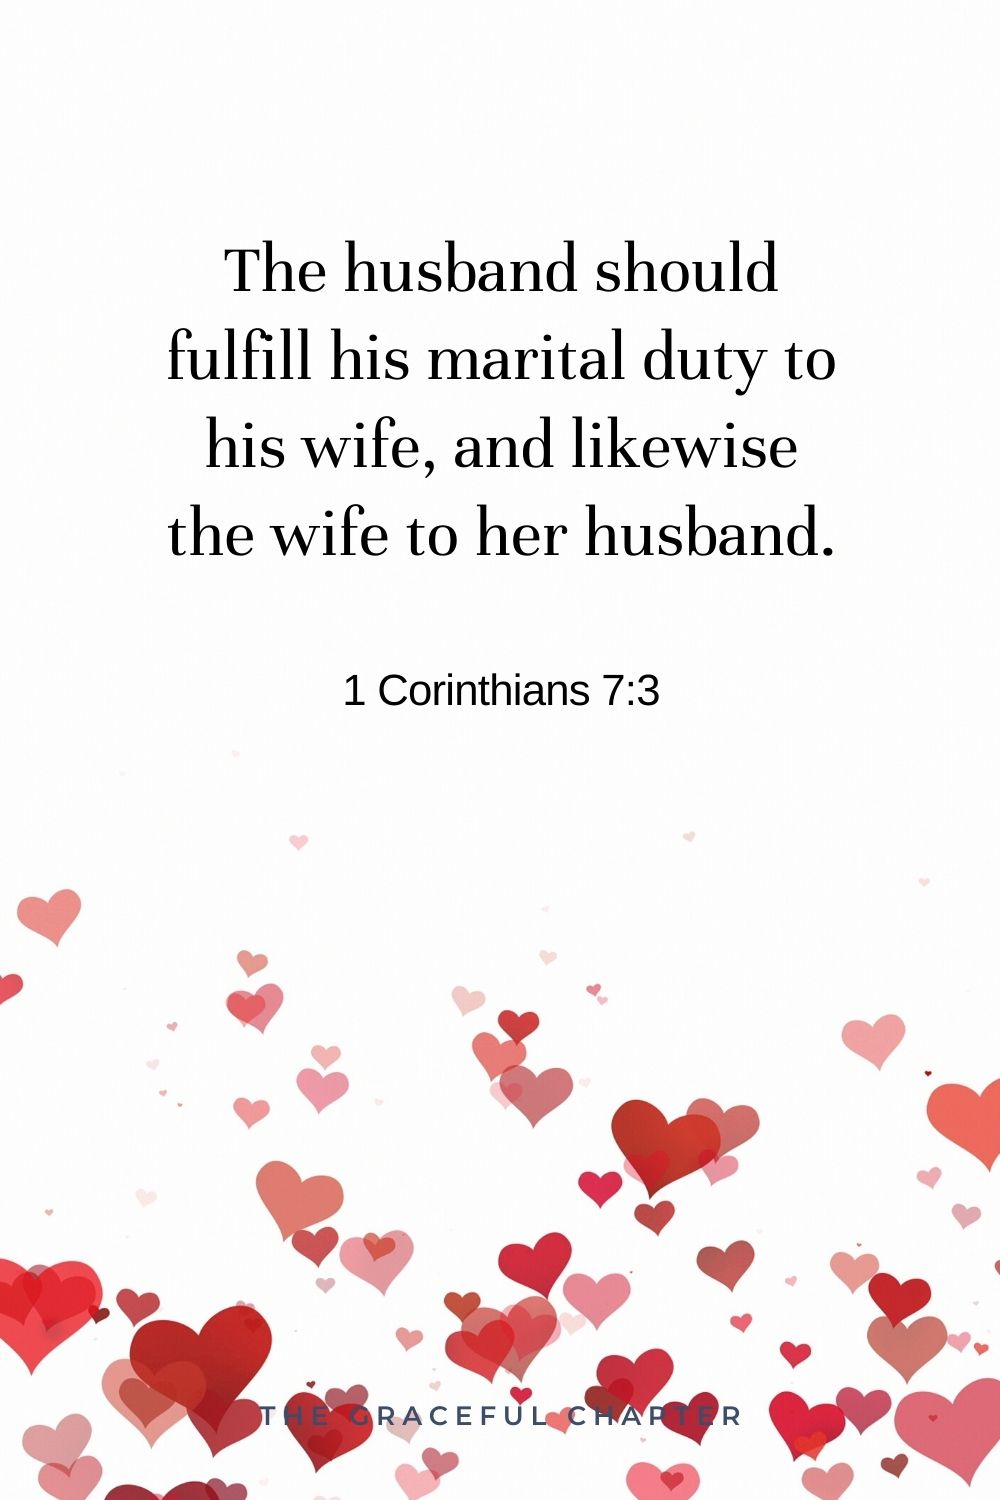 The husband should fulfill his marital duty to his wife, and likewise the wife to her husband. 1 Corinthians 7:3